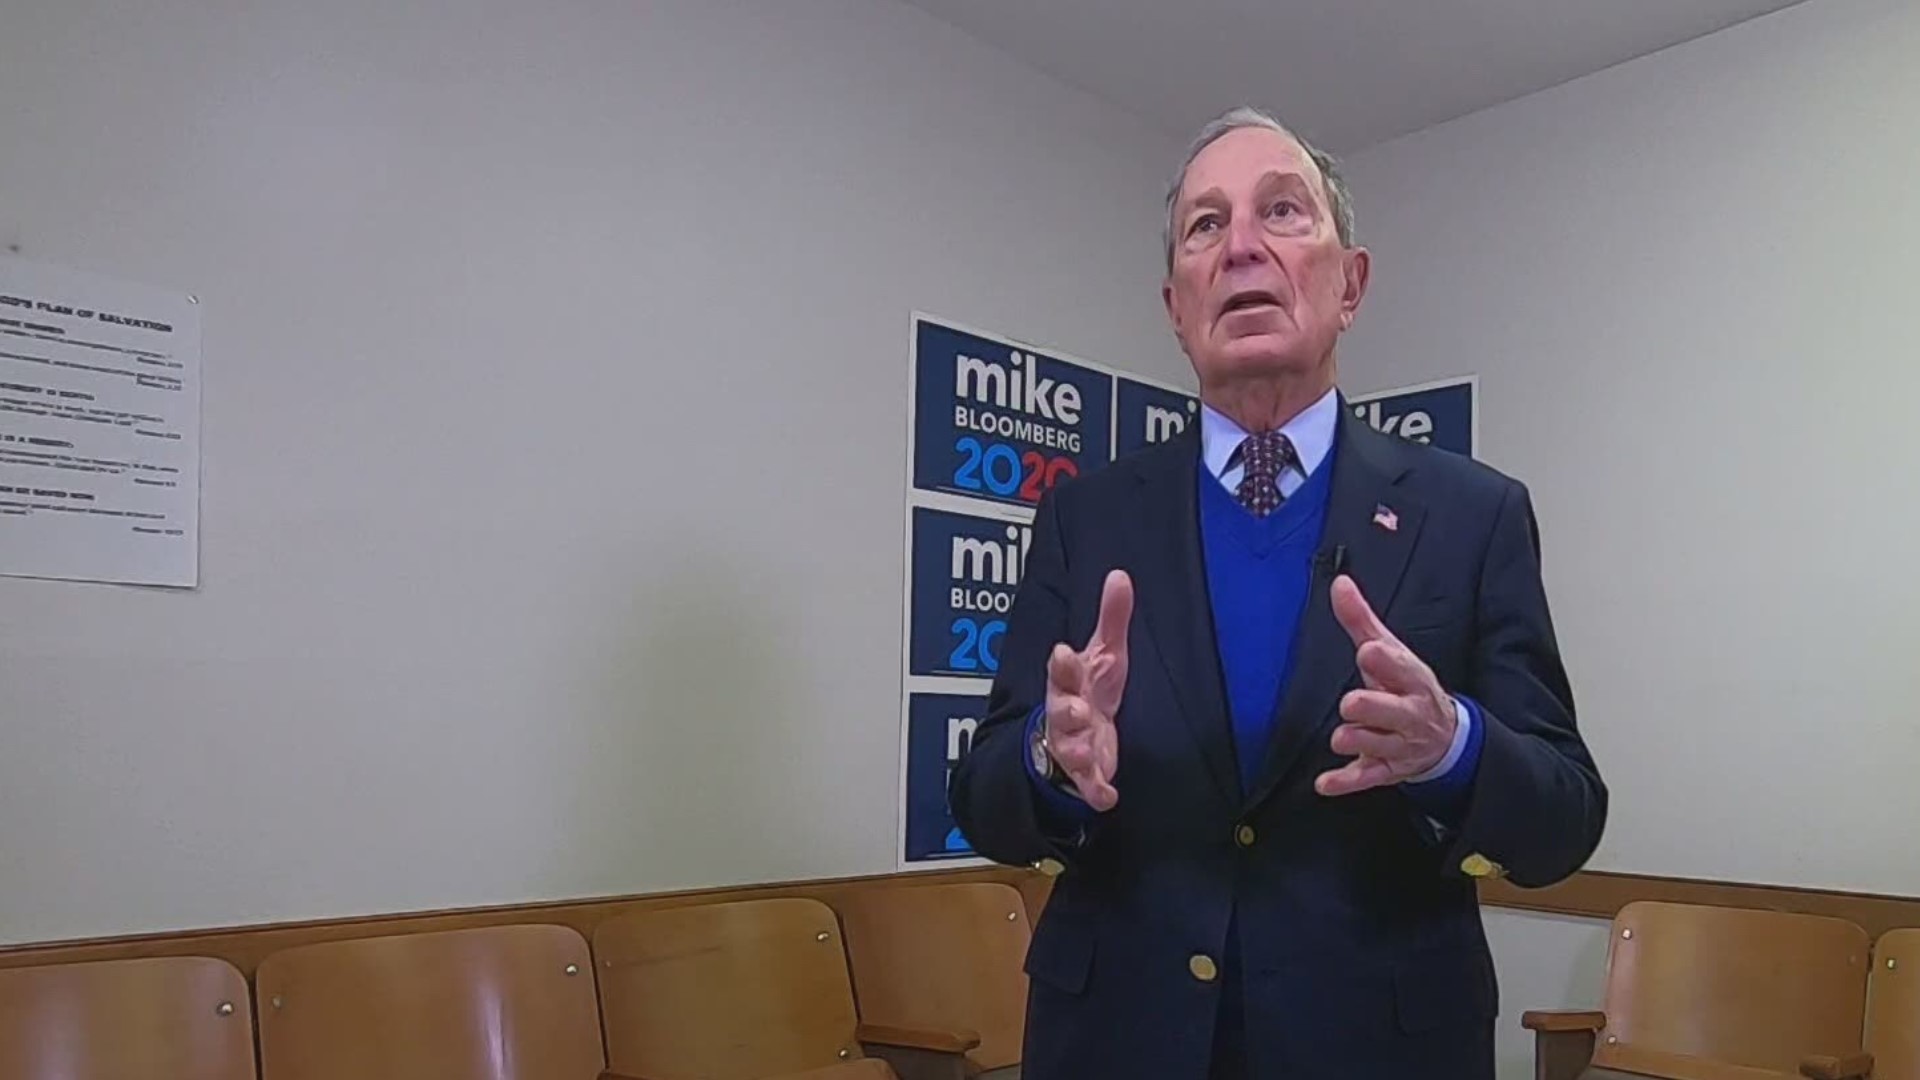 Our content partners at Talk Business and Politics sat down one on one with former New York City Mayor Mike Bloomberg at his rally in Northwest Arkansas.